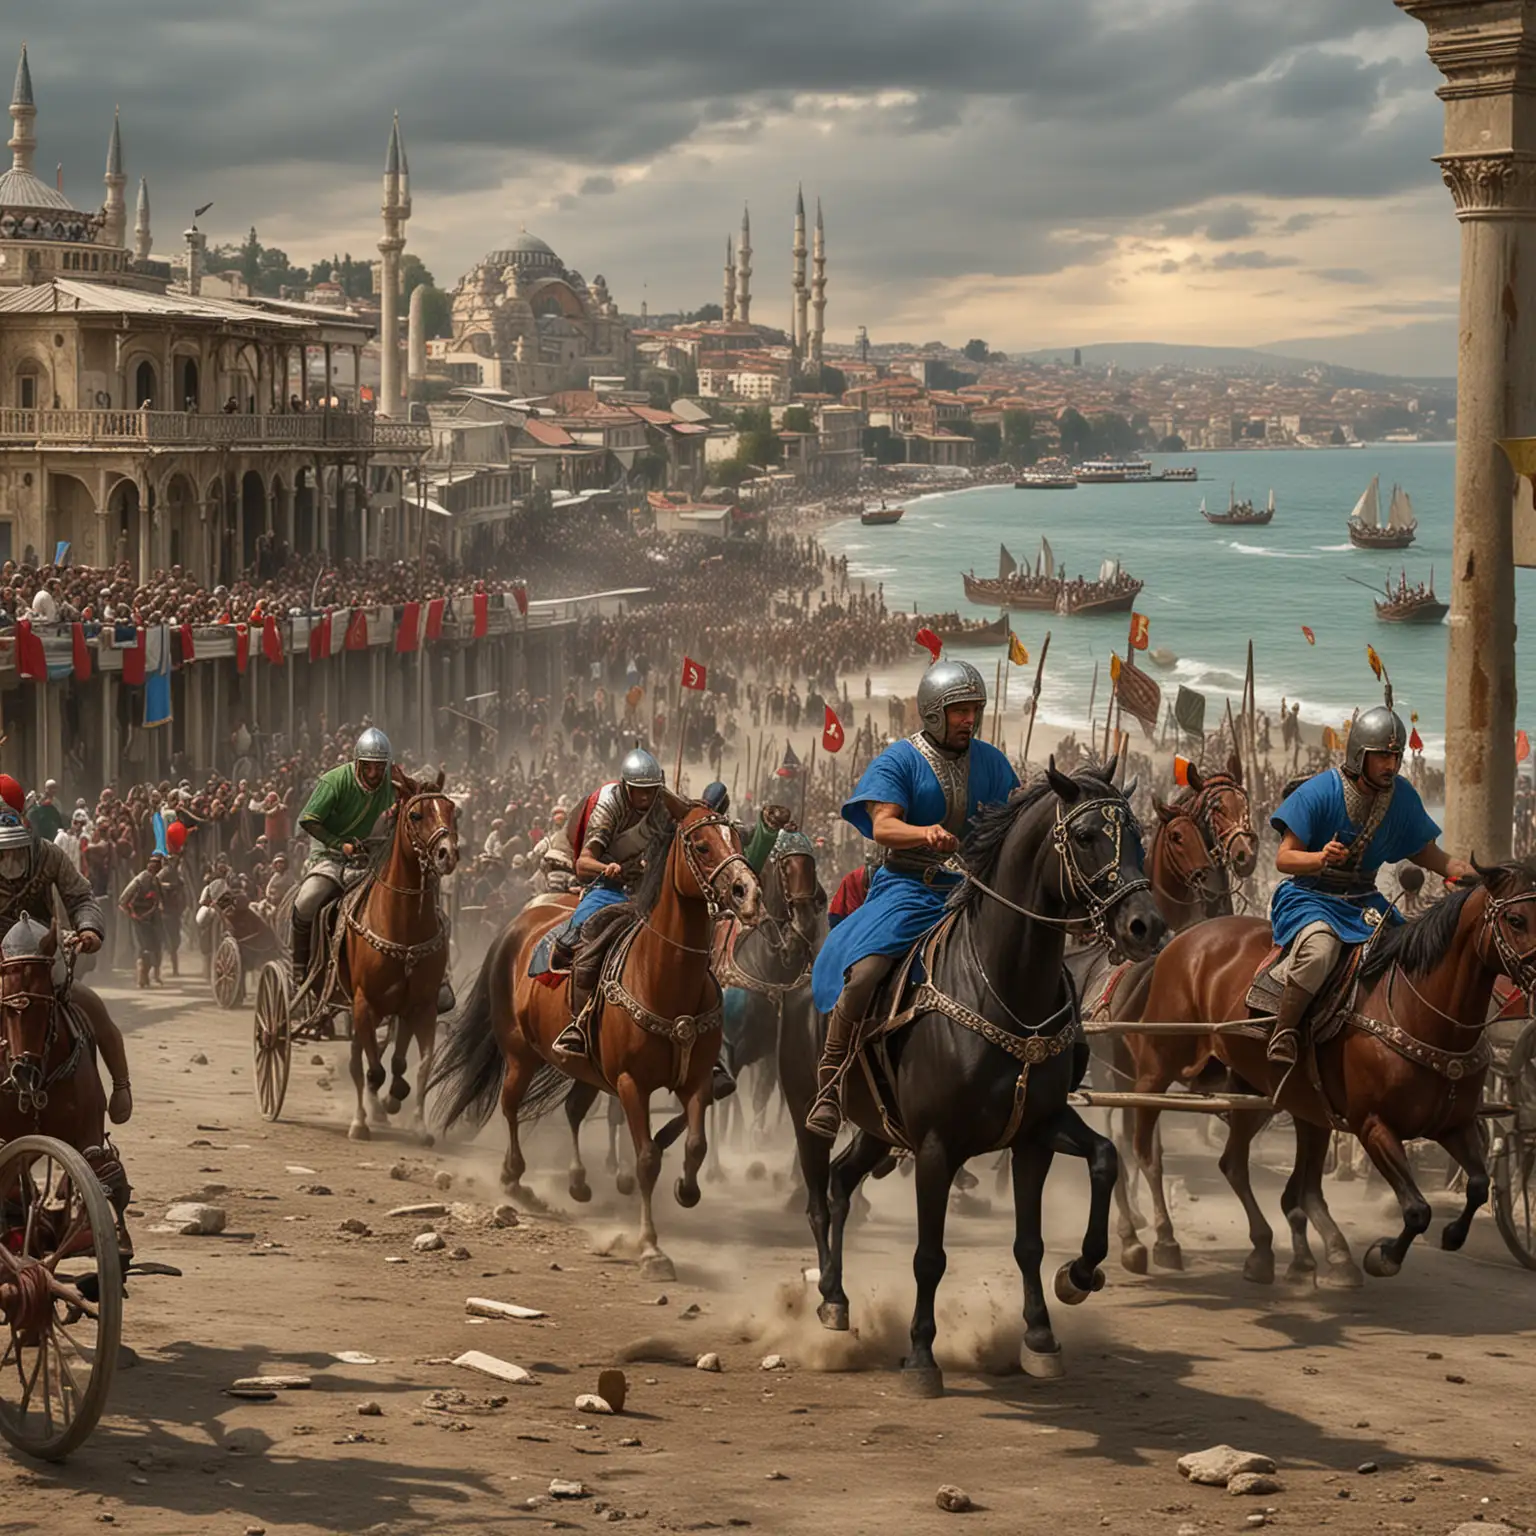 In Byzantium (now Istanbul), chariot races would take place. There were teams similar to the Blues and Greens representing factions, whose rivalry would sometimes escalate into a frenzy in the city! On the other side of the Atlantic, in Mesoamerica, ball games were highly revered and held great spiritual significance. The winners were hailed as heroes, while the losers were severely punished—sometimes even risking their lives to appease the gods!